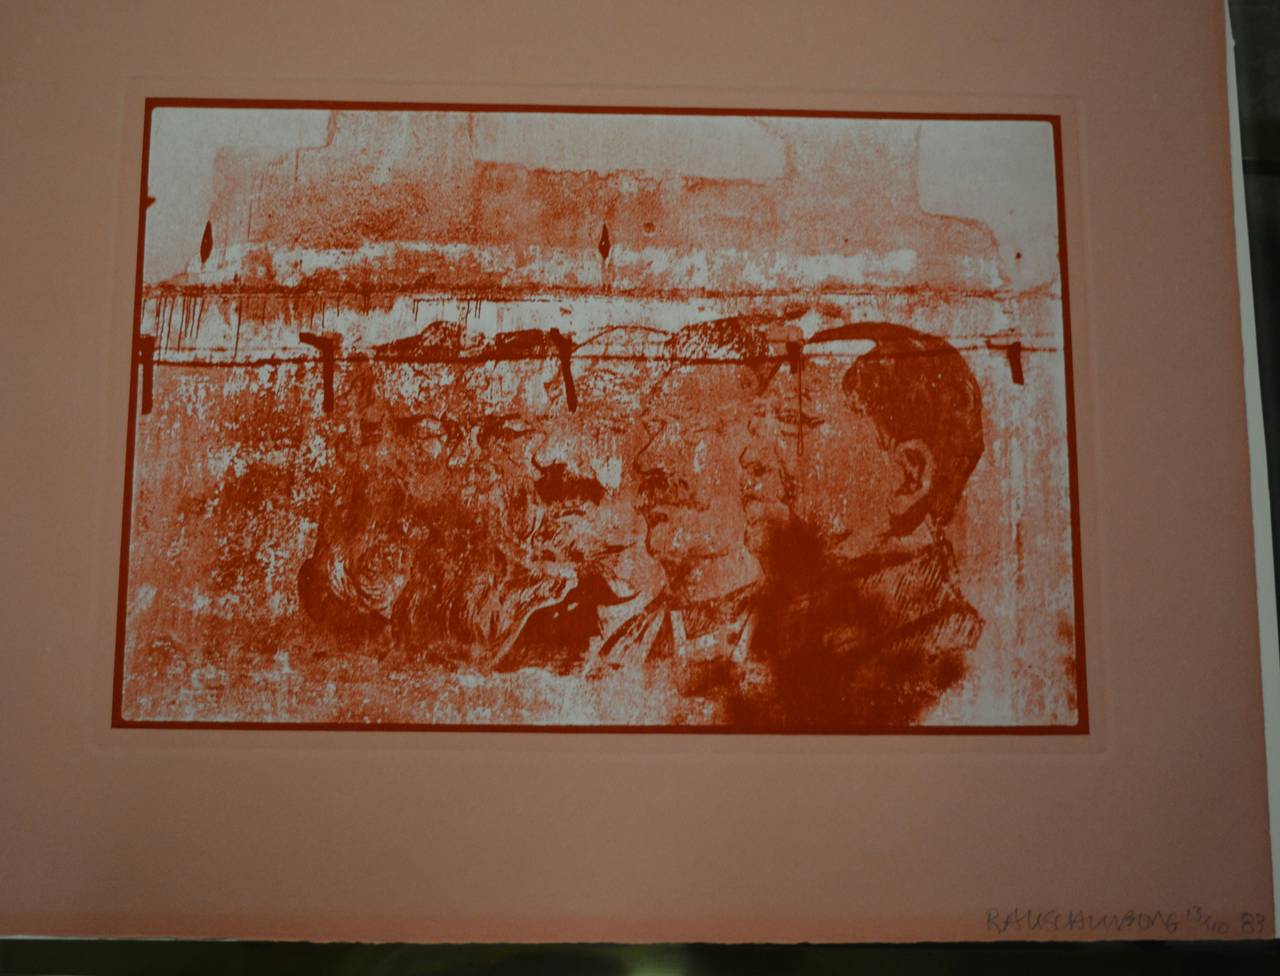 Print by Robert Rauschenberg, circa 1983. This Untitled work from the Study for Chinese Summerhall is signed dated to lower right corner. This is no.13 of an edition of 40.
Condition is very good with pale mat staining as shown along outside